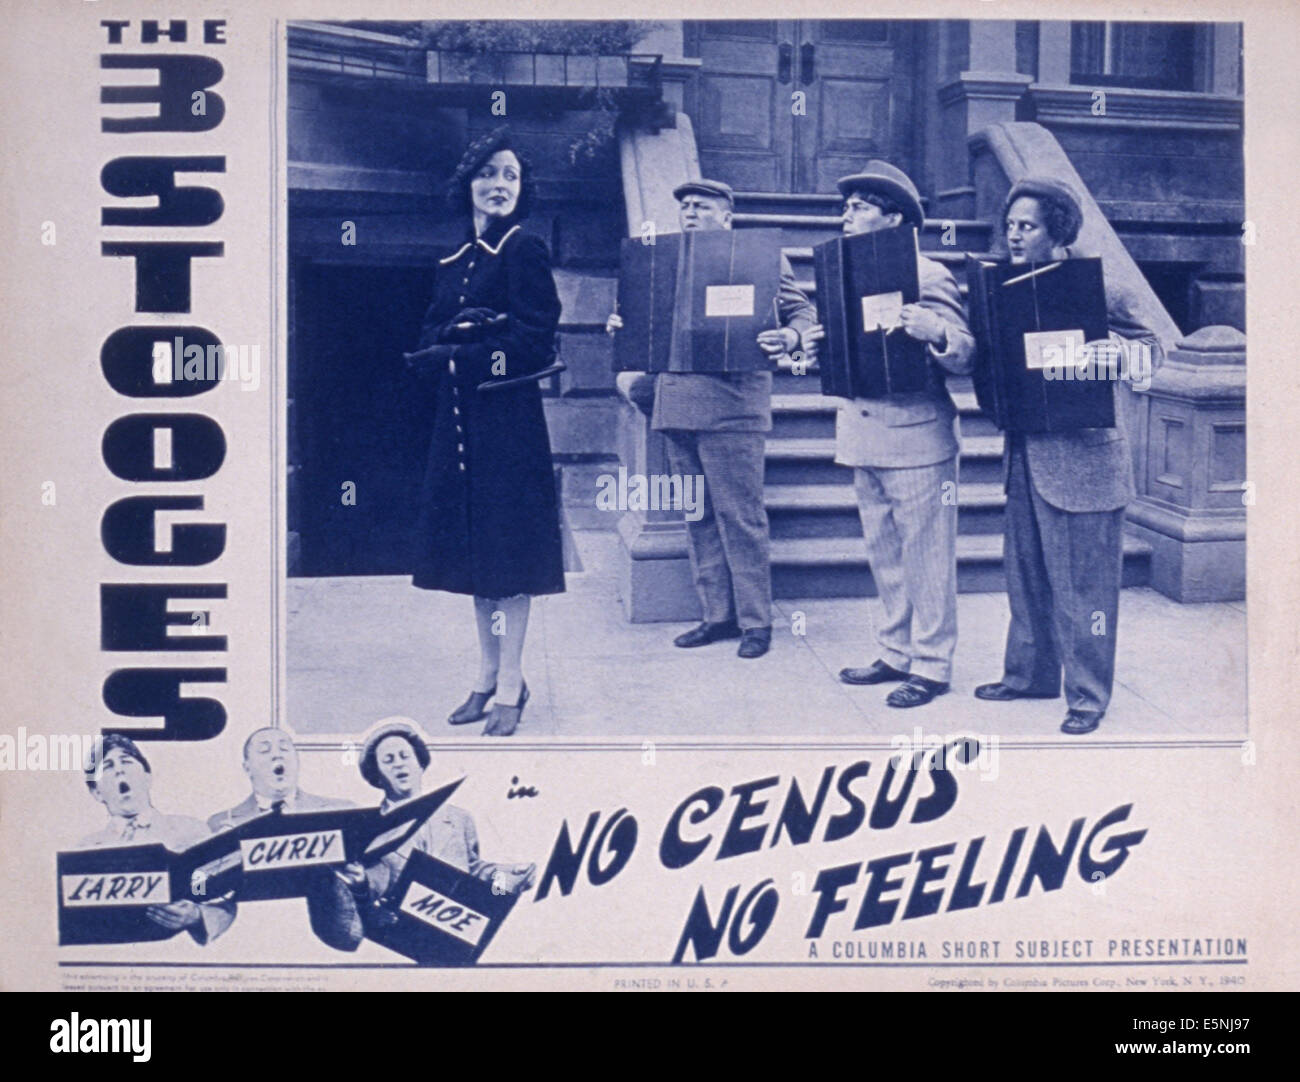 NO CENSUS, NO FEELING, Evelyn Young, Curly Howard, Moe Howard, Larry Fine (The Three Stooges), 1940 Stock Photo